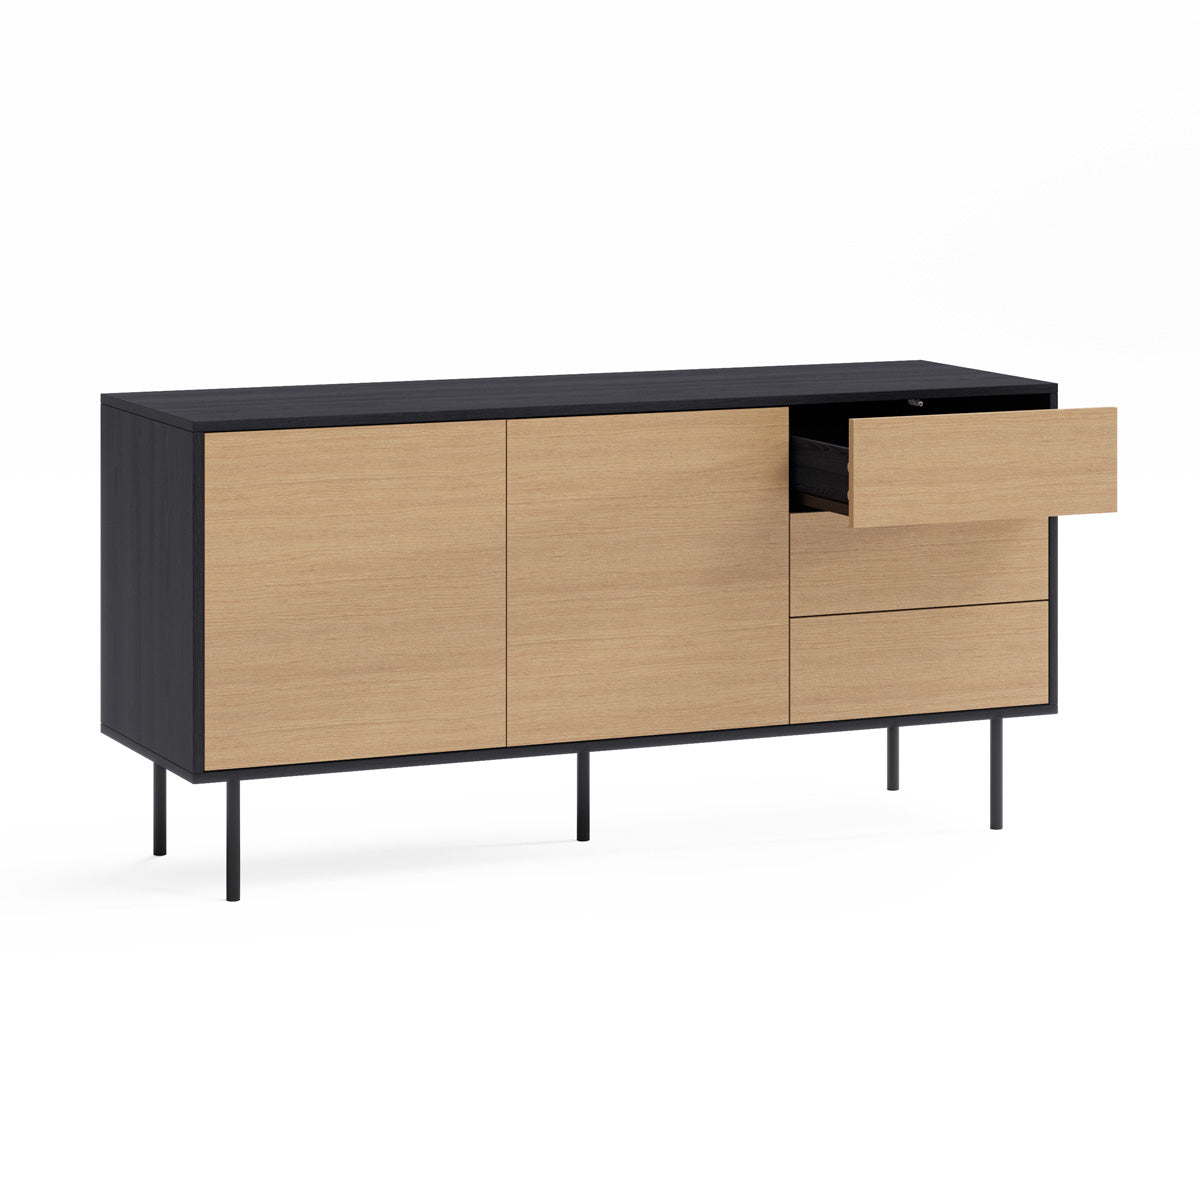 Black Sideboard Buffet Unit with Metal Legs (Harvey Collection)